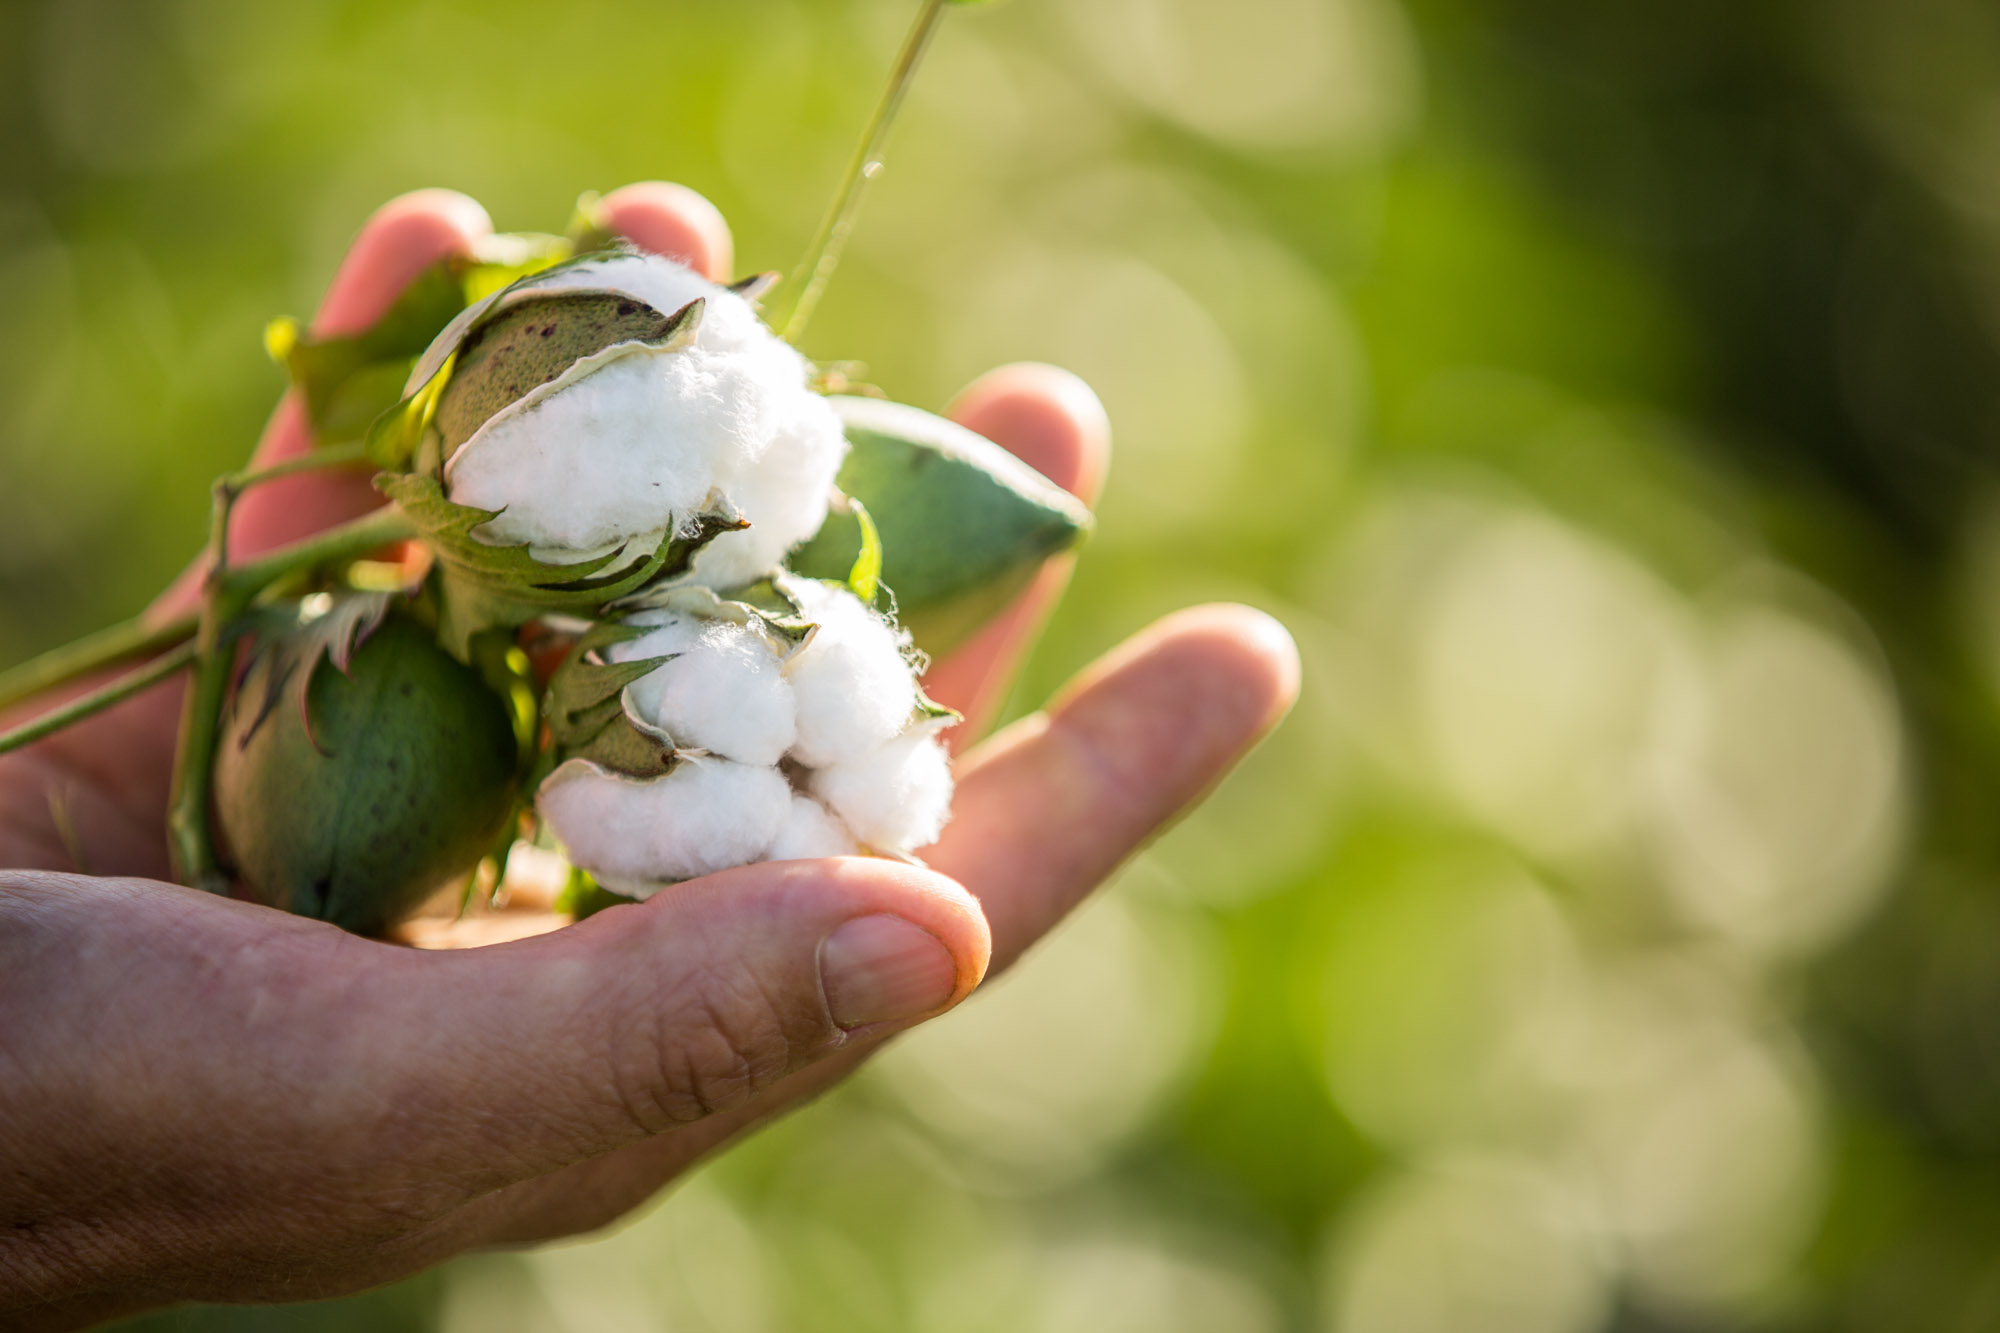 Southern valleys cotton in hands - Southern Valleys Cotton Growers ...